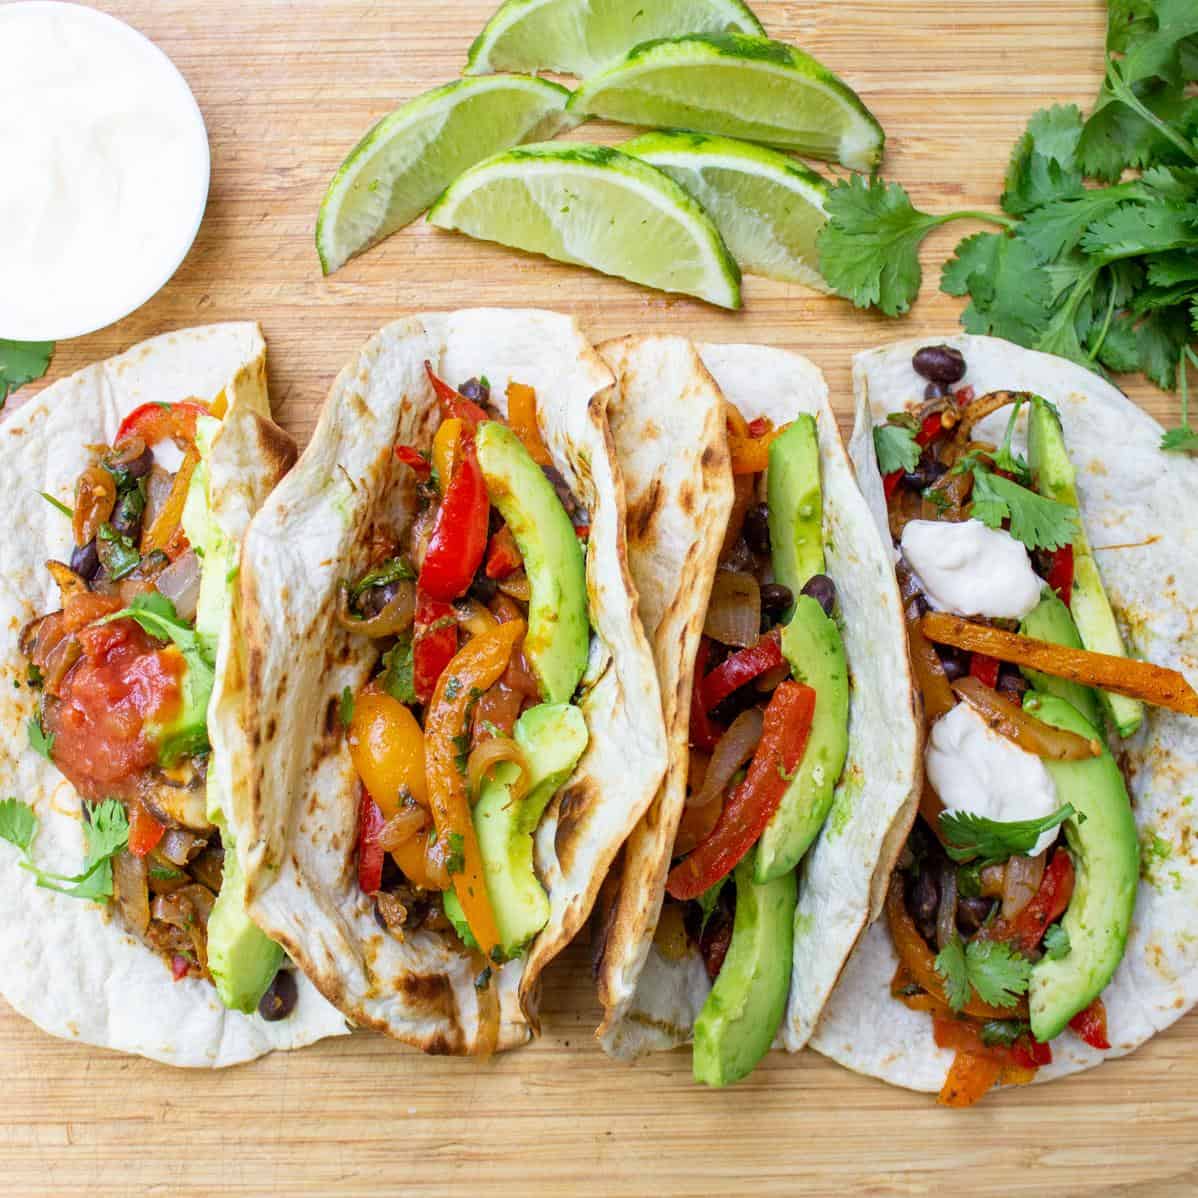  Missing out on meat? Not with these vegetarian fajitas!